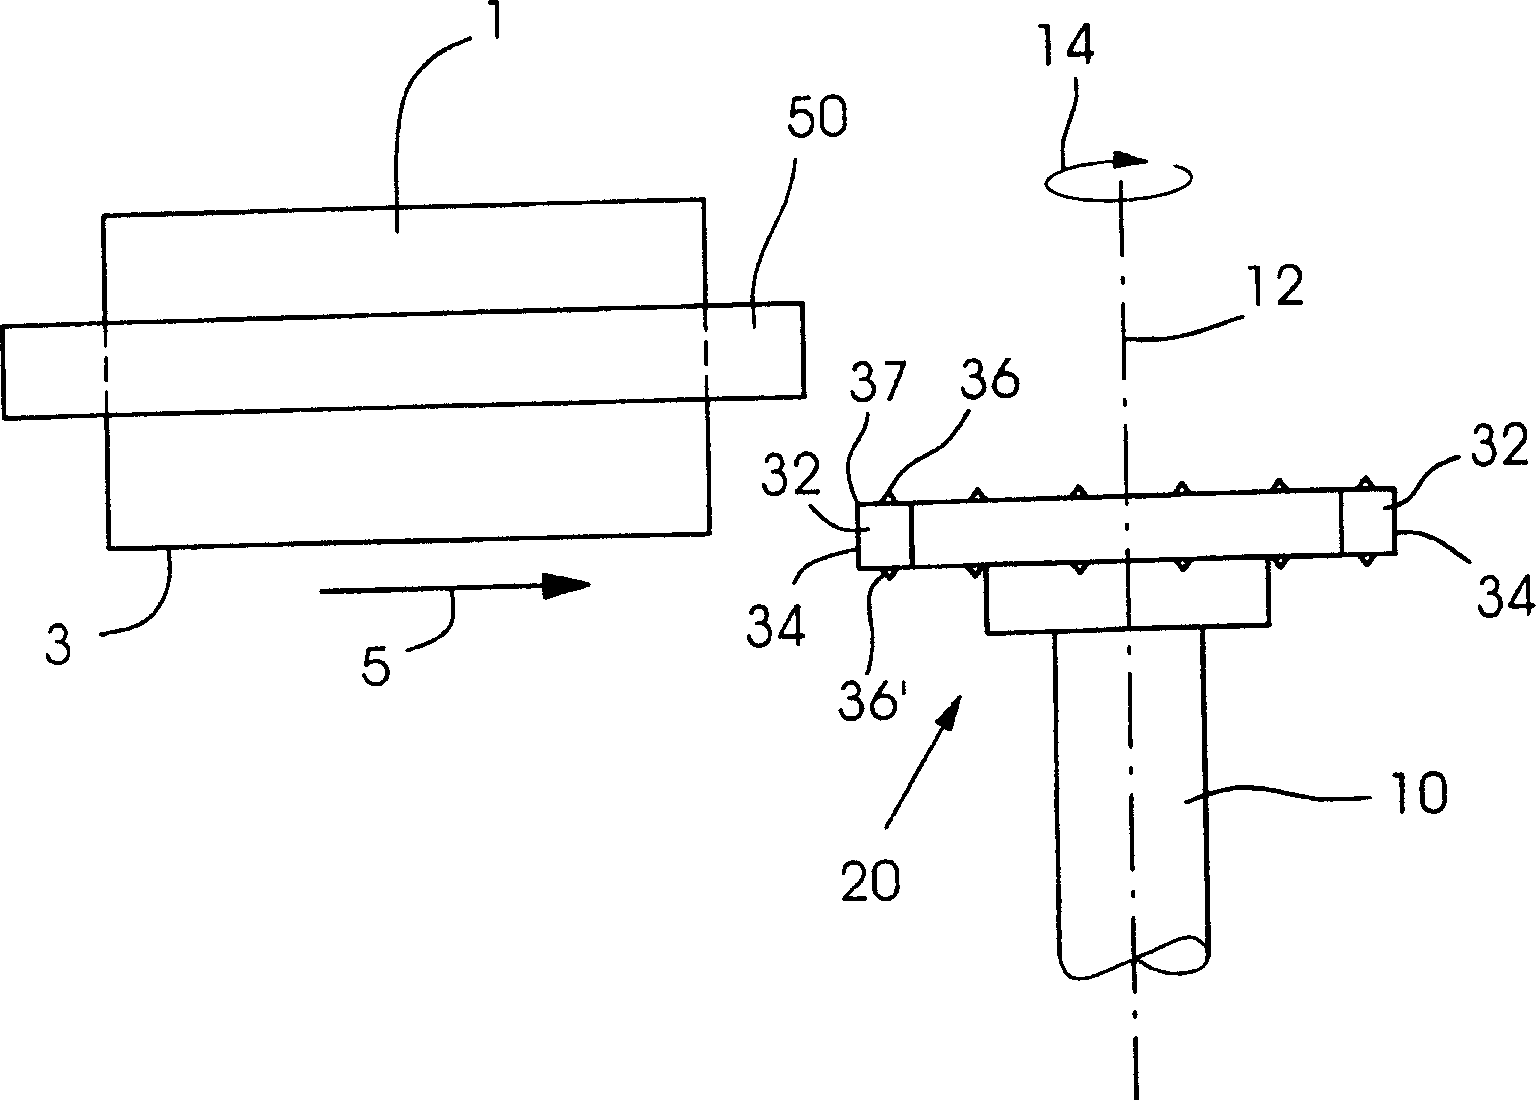 Apparatus for rotary working to material